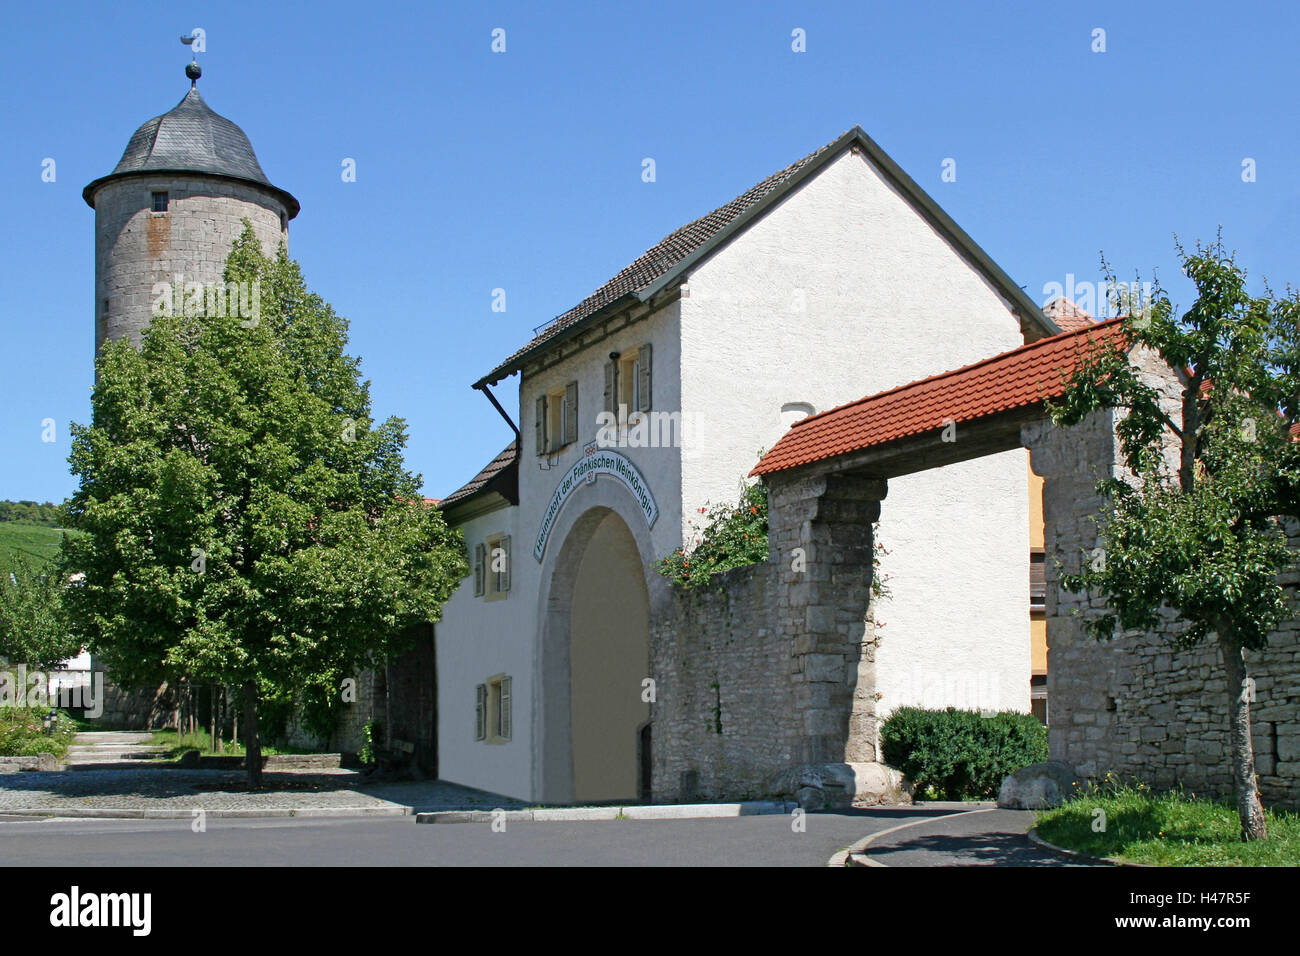 Germany, Bavaria, Eibelstadt, lower goal, tower, in 1876, in 1996, in 1997, city wall, city wall, Middle Ages, city fortification, house line, place of interest, tourism, sunshine, heaven, blue, way through, passage, round tower, Stock Photo